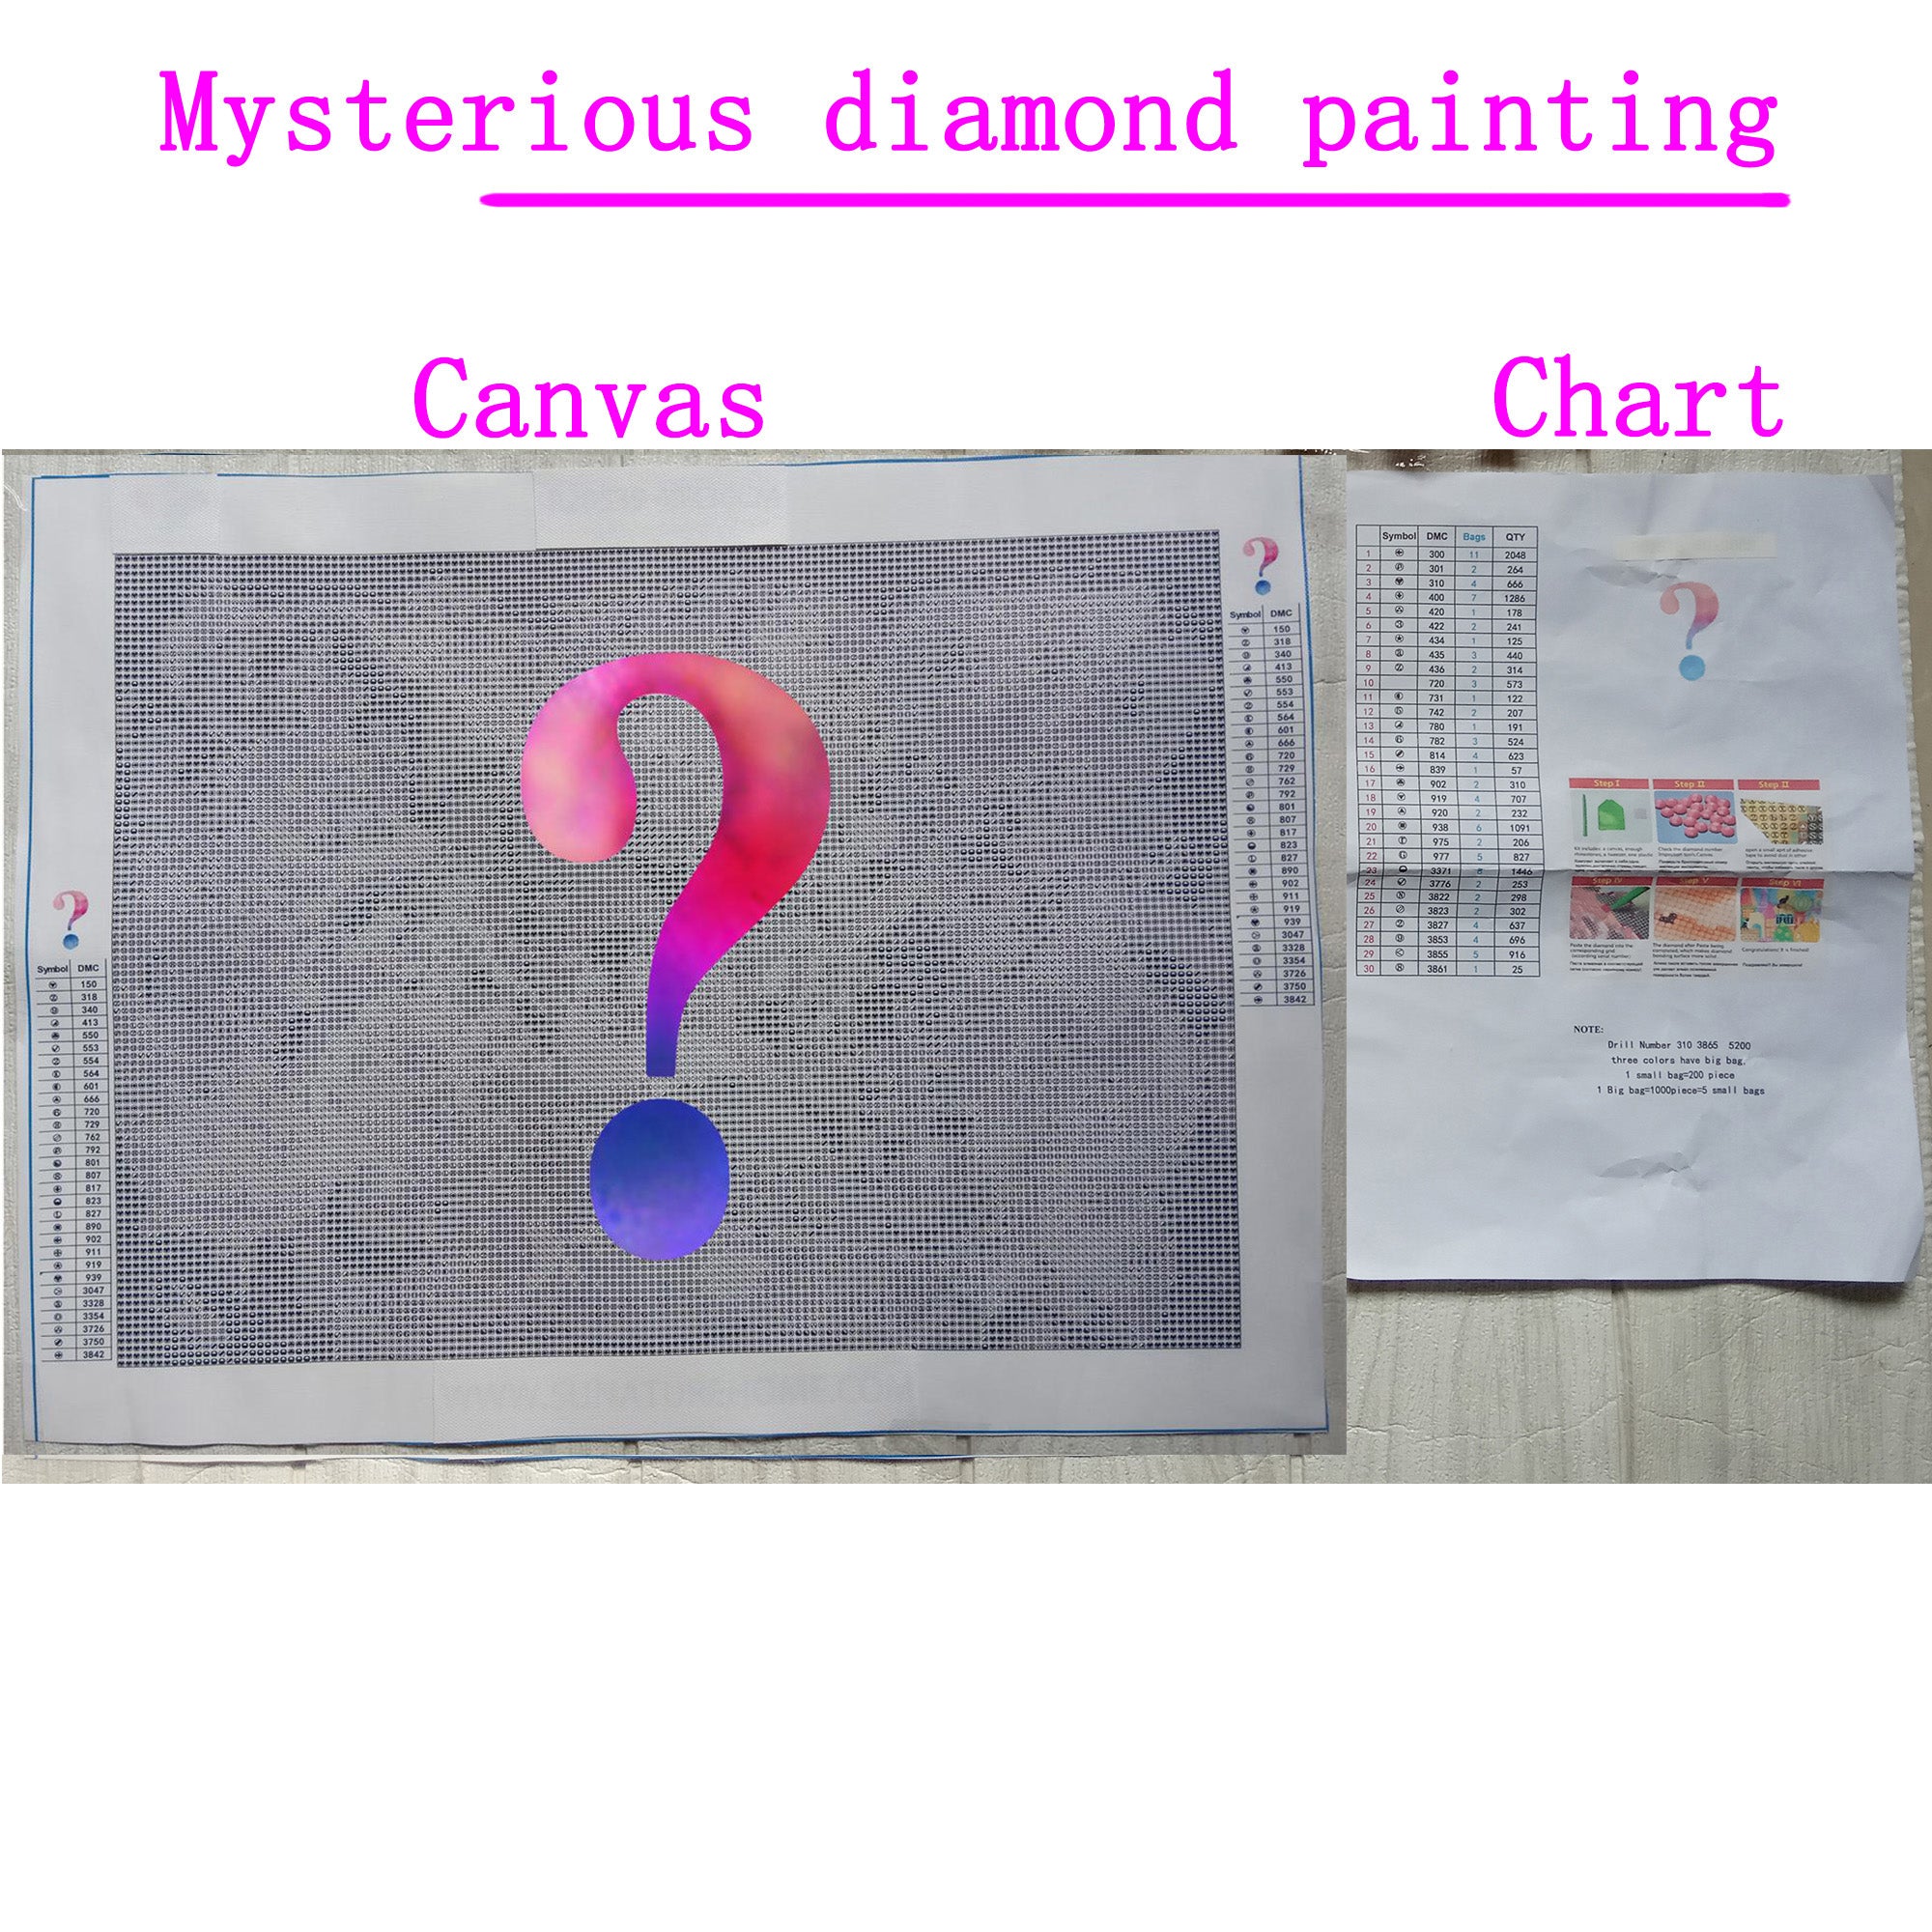 CATEARED Mystery Diamond Painting Kit,Mysterious 5D DIY Diamond Paint by Numbers Art Kit for Adults with Resin Drill Pen and Macaron Wax for Home